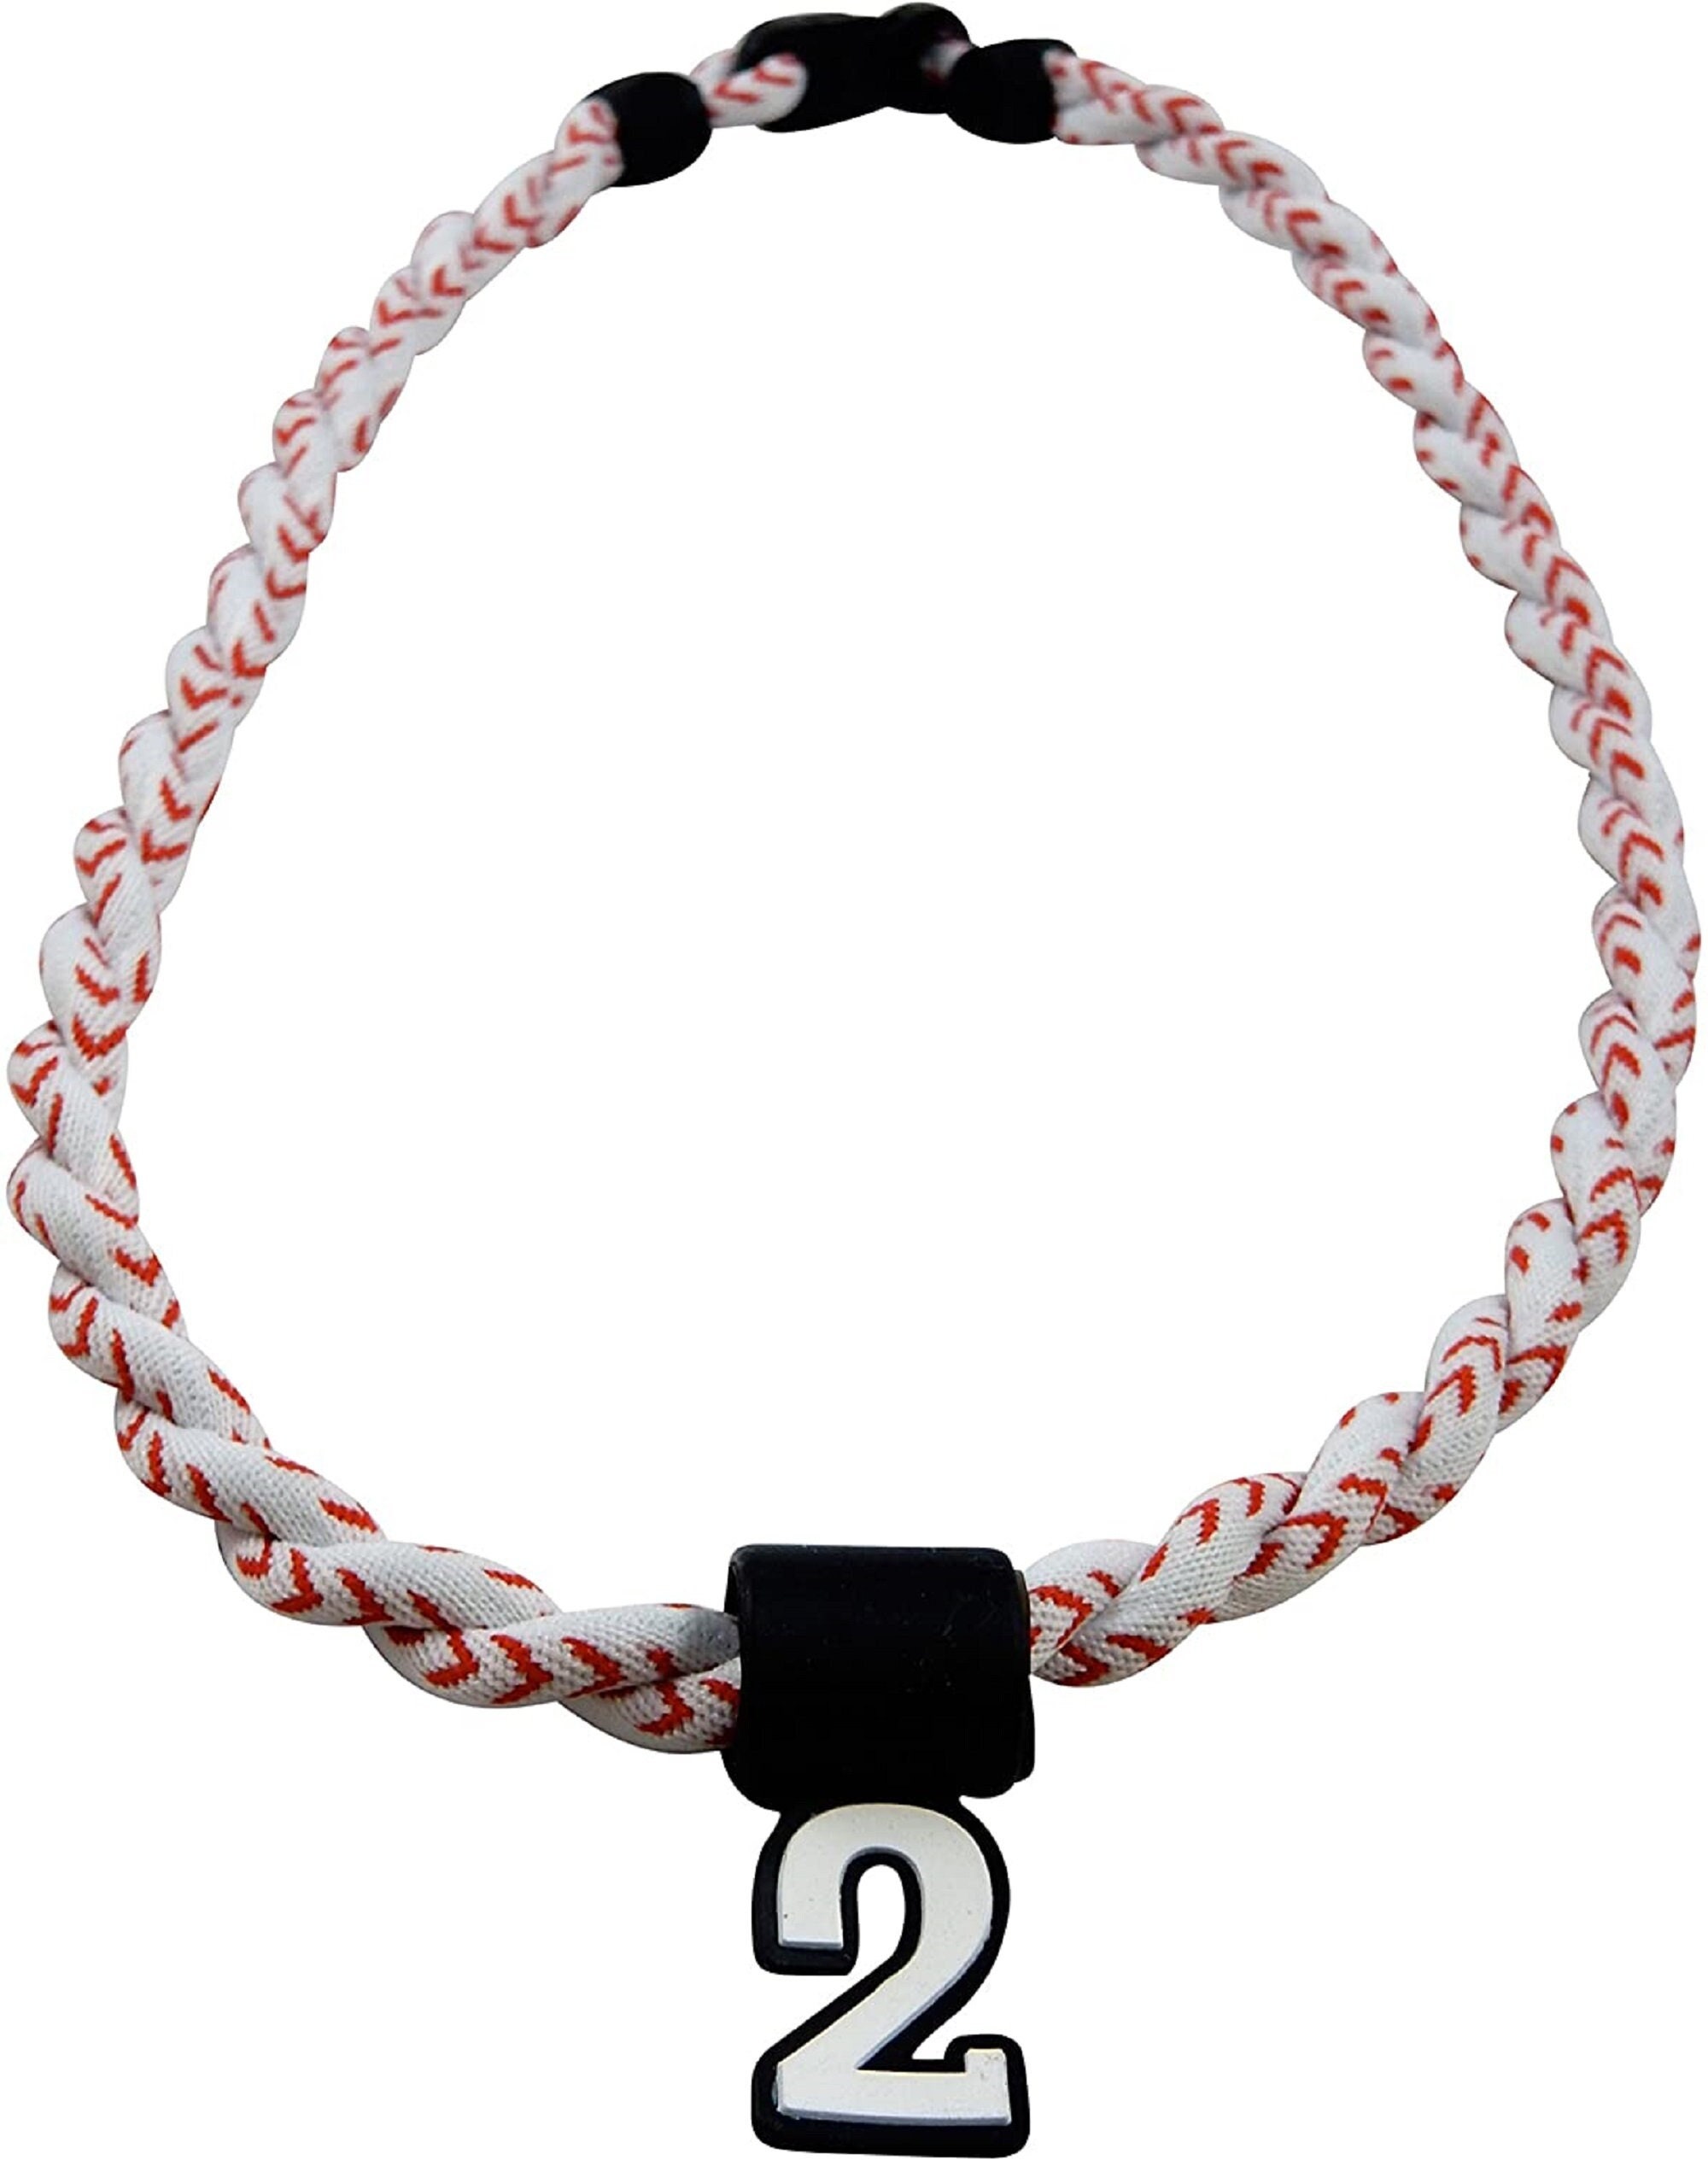 PICK YOUR NUMBER - White Baseball Stitch Twist Tornado Necklace